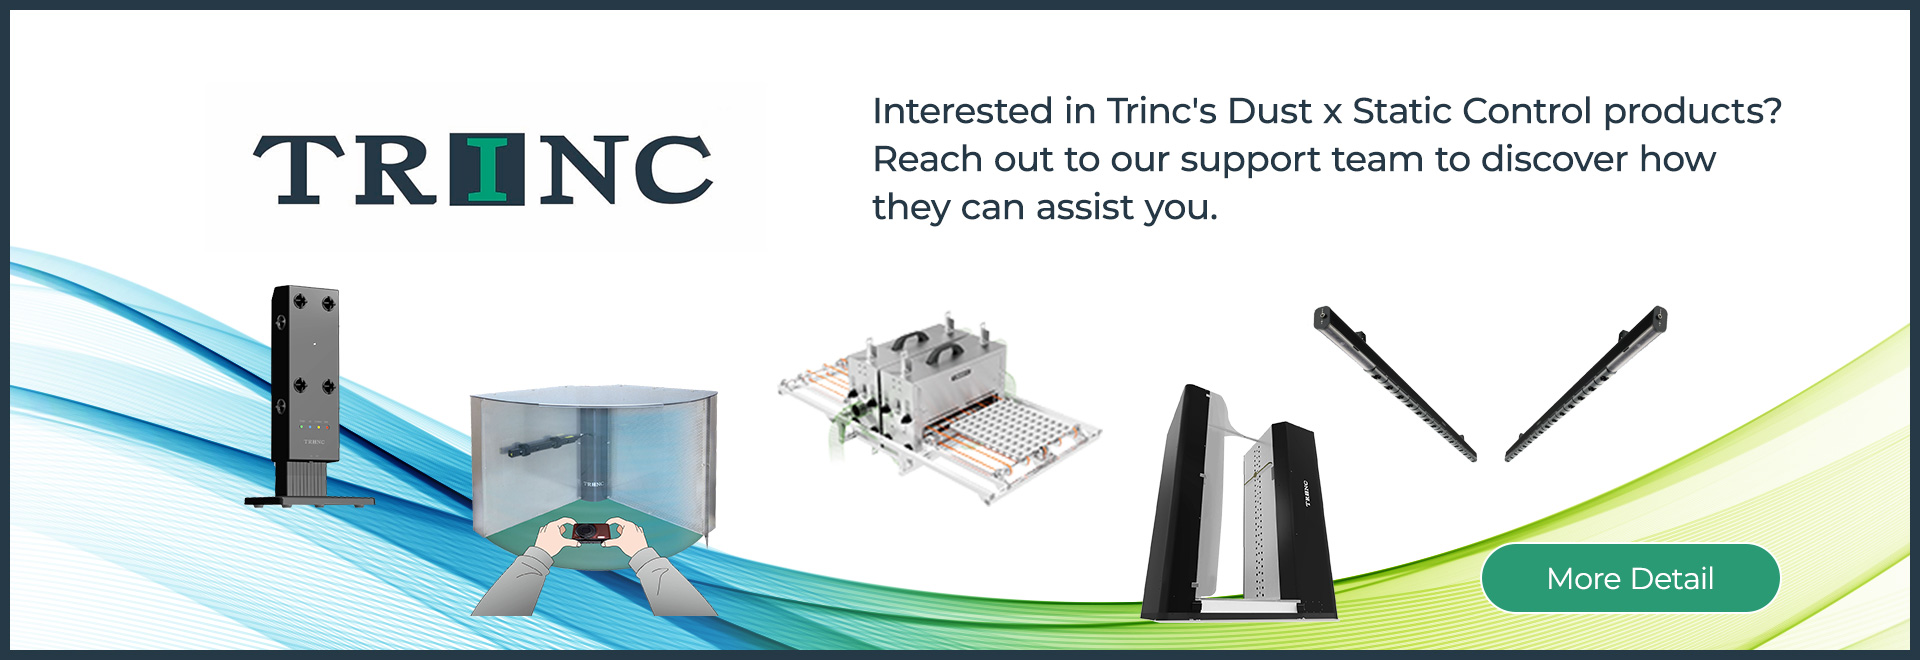 TRINC - More Detail - I would like to know more about TRINC’s various products. I would like to consult with TRINC about “dust x static” countermeasures.